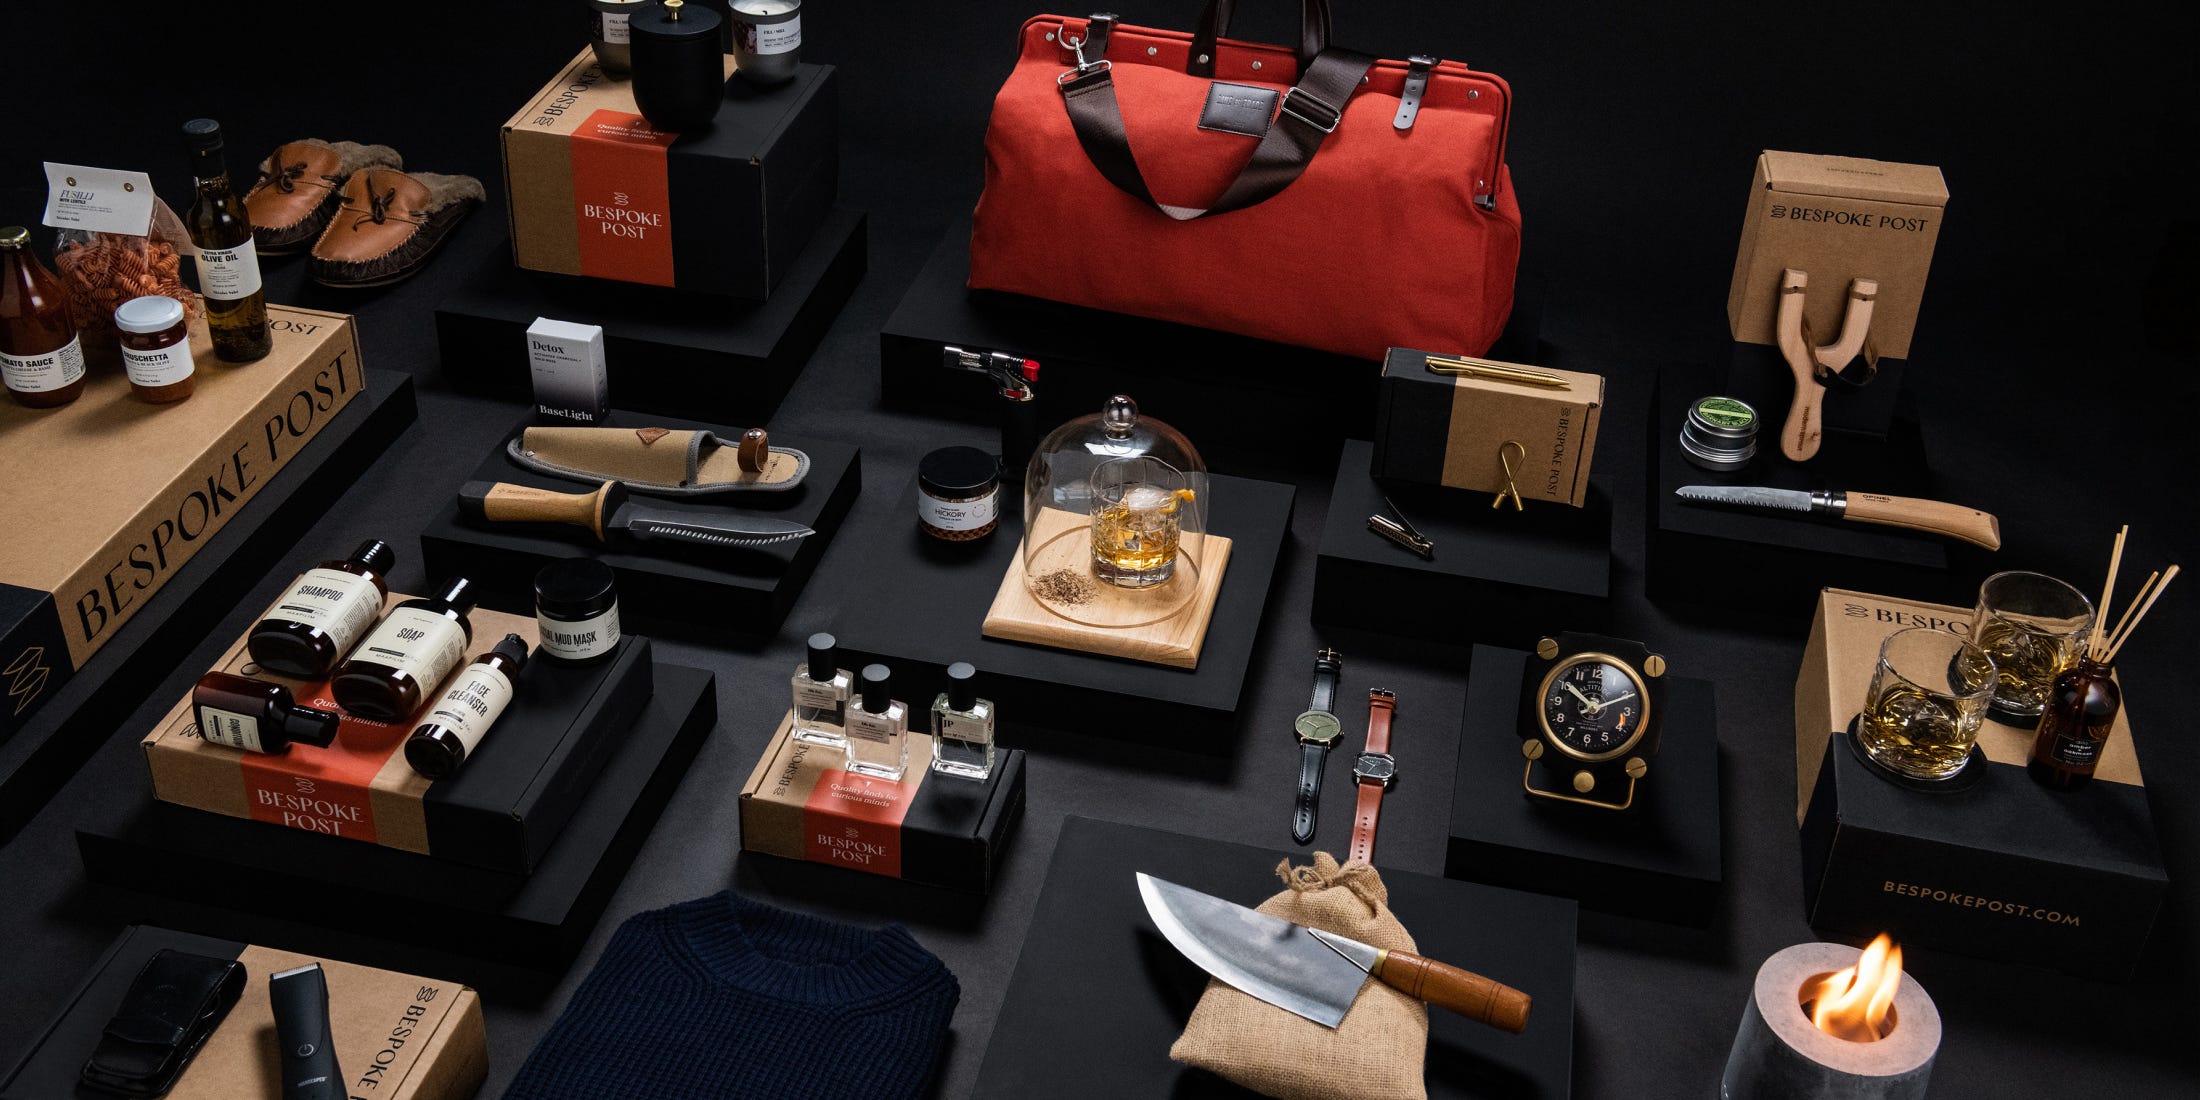 A layout of things on boxes: different size bottles of shampoo, soap, face cleanser, a jar of mud mask, a clock, a chef’s knife, a red duffel bag, slippers, a slingshot, a bottle of incense, two wrist watches, an electric shaver, three candles, a woolen sweater, a flame torch, a nail clipper, a copper pen, a bag of fusilli, tomato sauce, and olive oil.